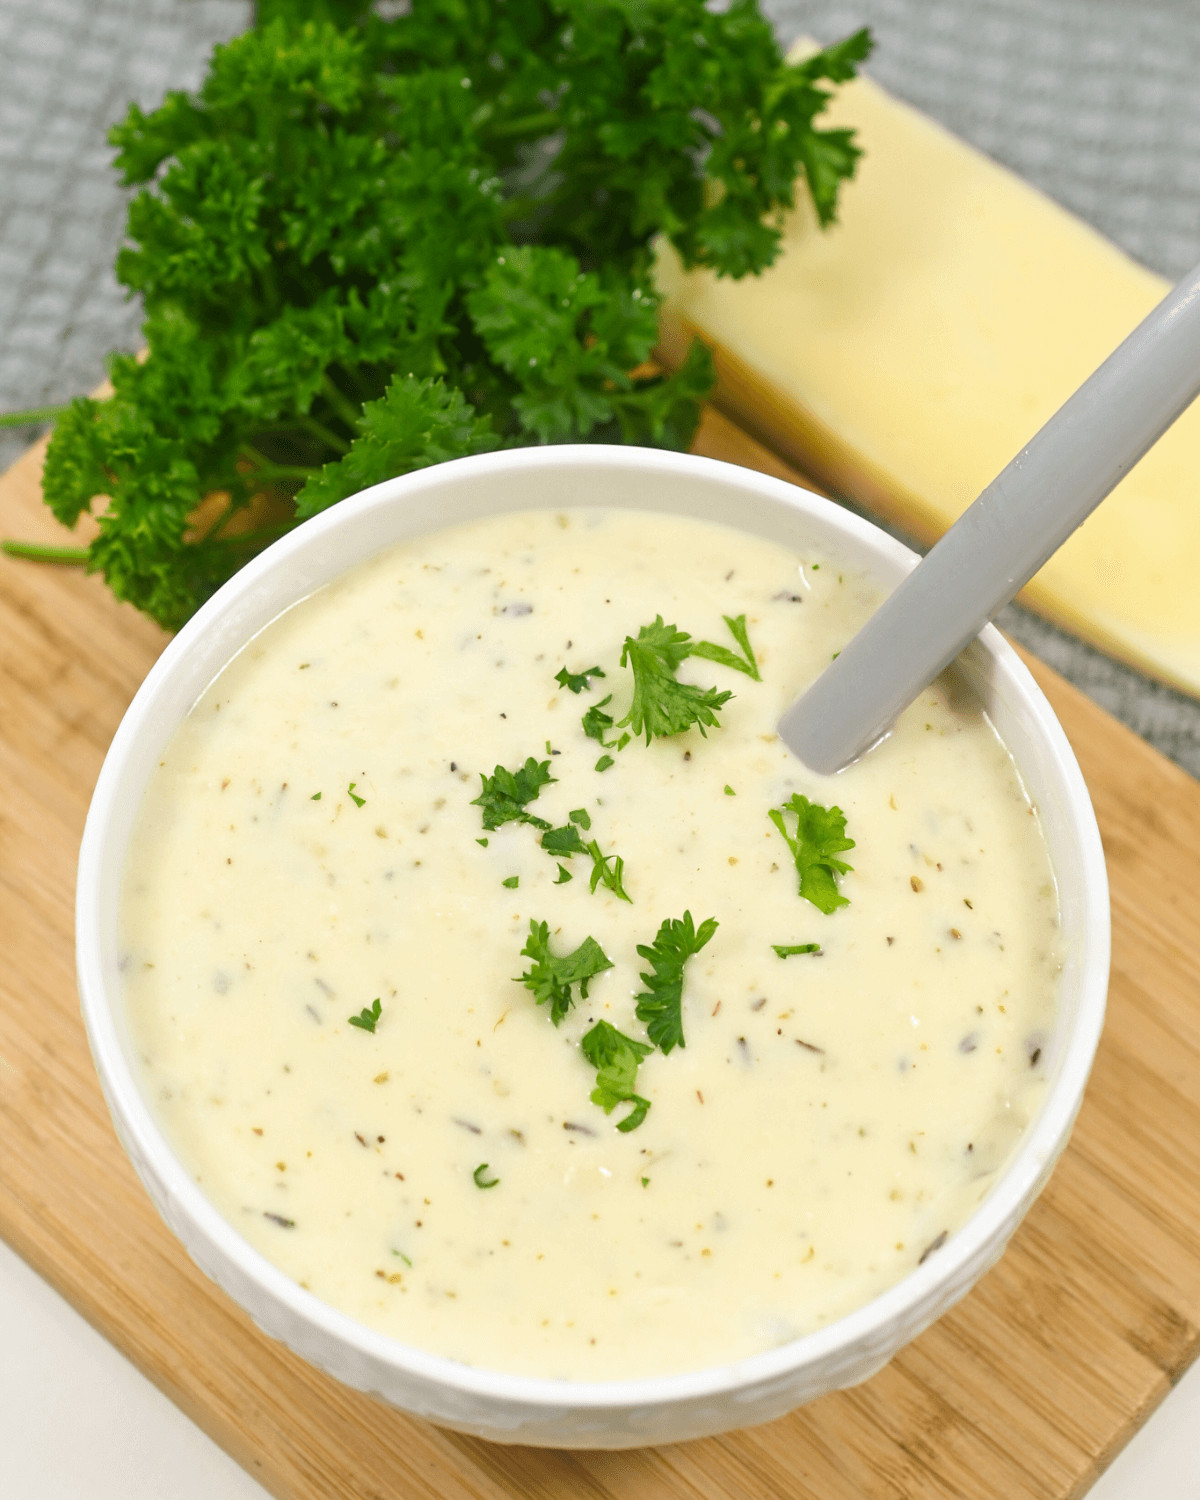 Bowl of creamy garlic parmesan sauce soup garnished with parsley on a wooden board, with cheese and more parsley in the background.